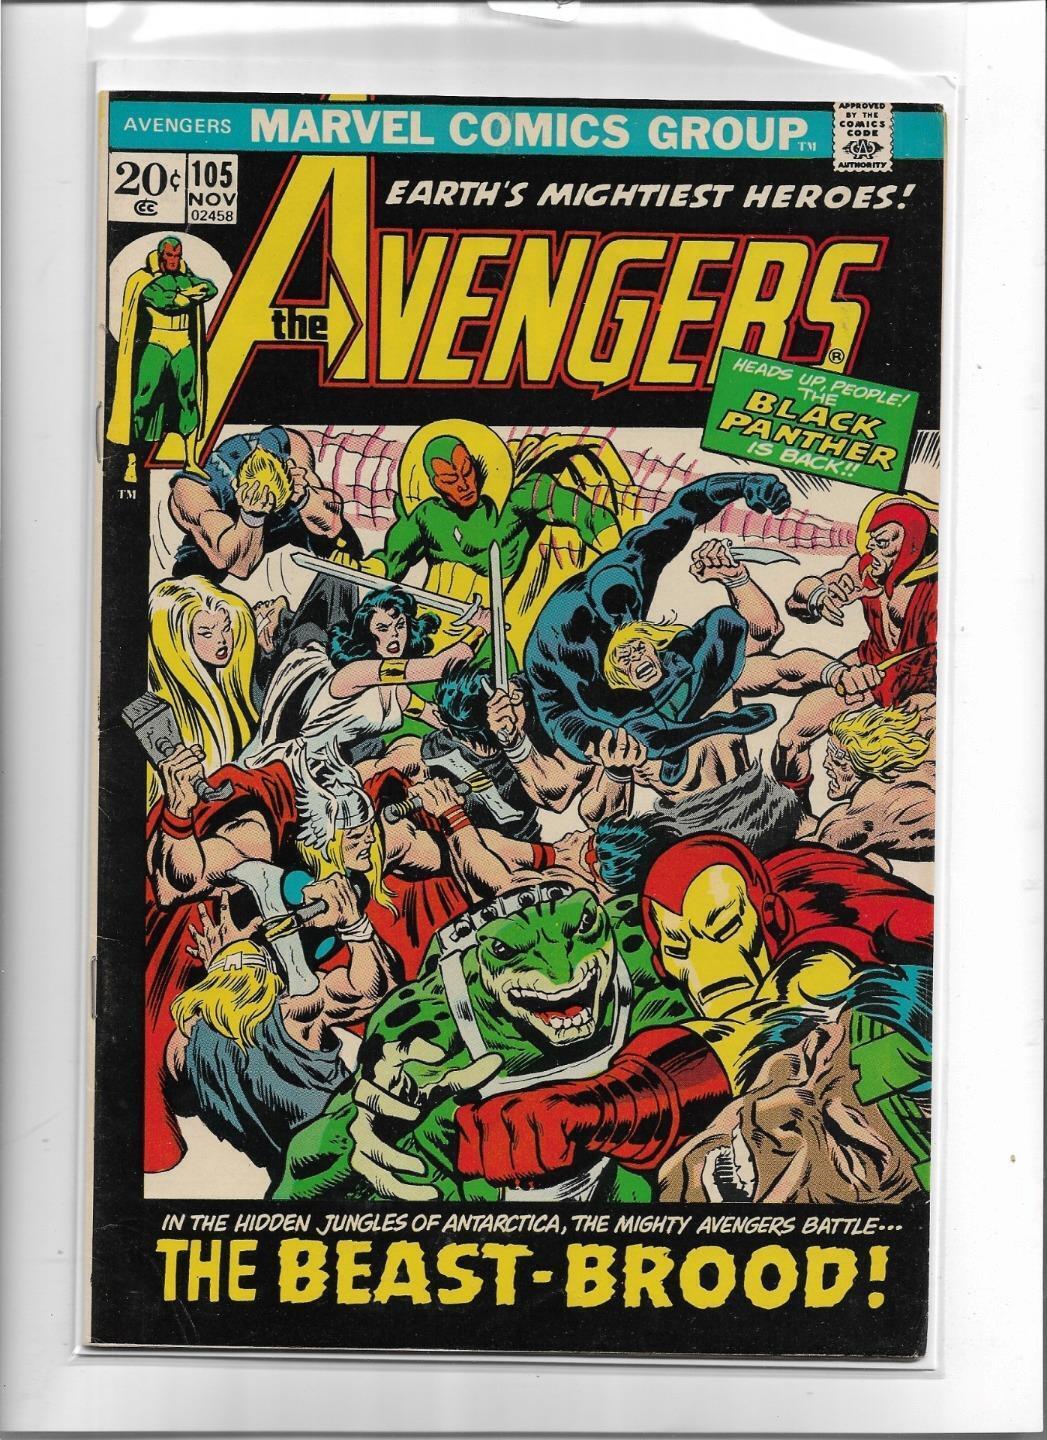 THE AVENGERS #105 1972 FINE-VERY FINE 7.0 2676 BLACK PANTHER